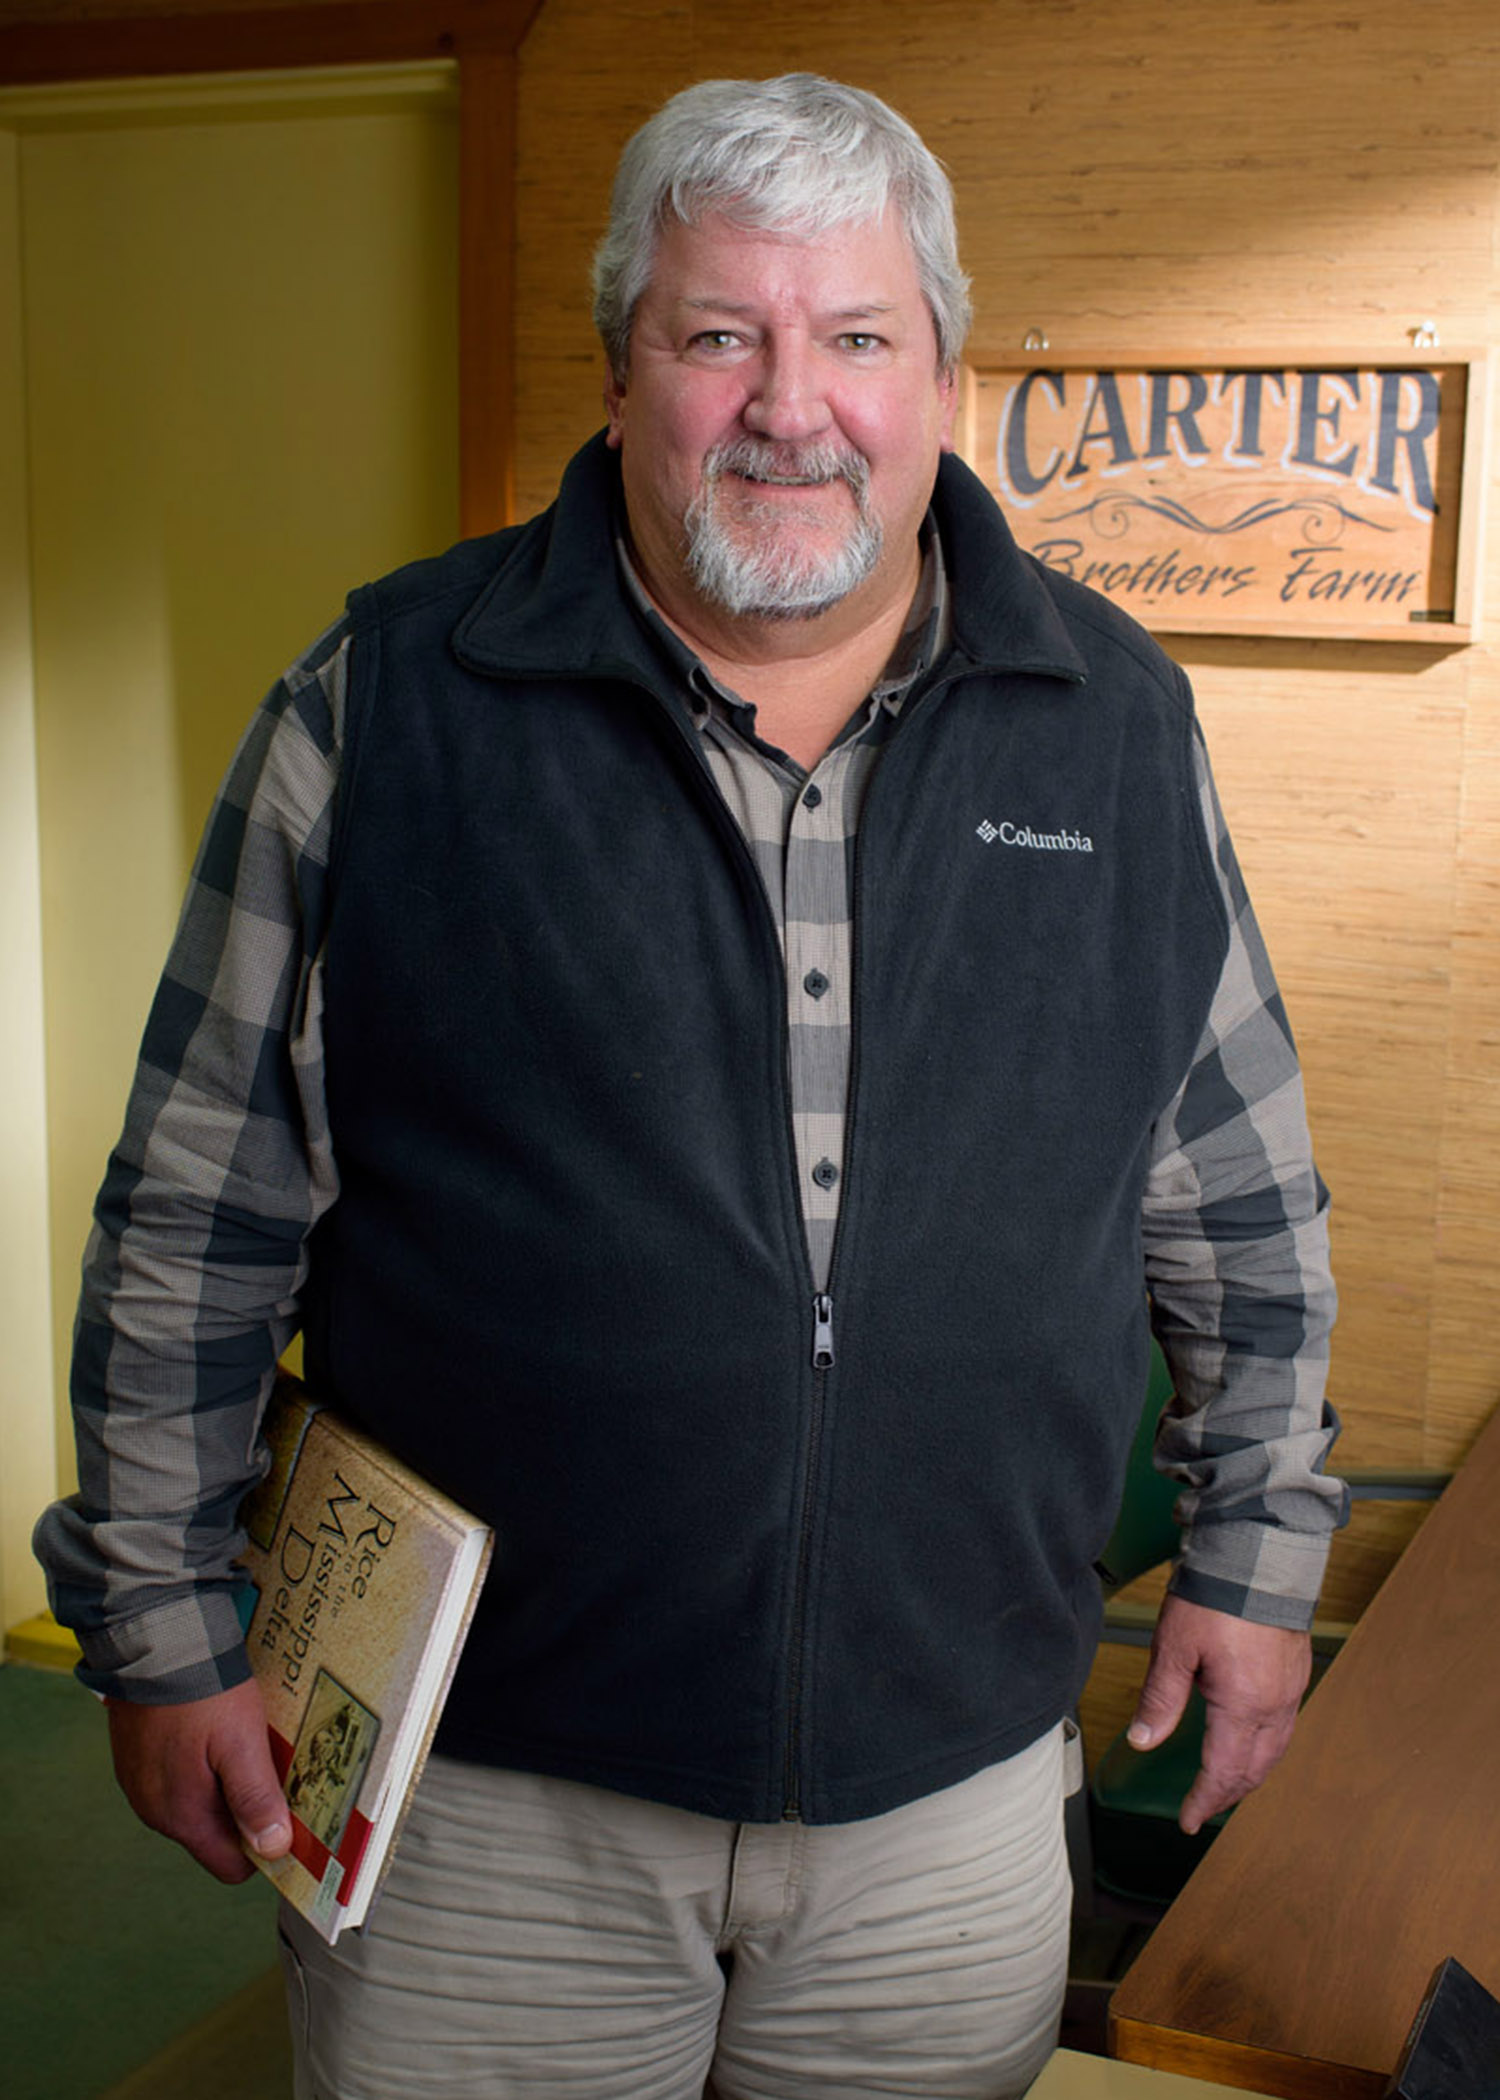 A gray-haired man with a goatee wears a navy blue vest over a blue-checkered, long-sleeved polo and tan slacks. He stands in front of a “Carter Brothers Farm” sign and beside a desk with a rolodex as sun filters across the background.